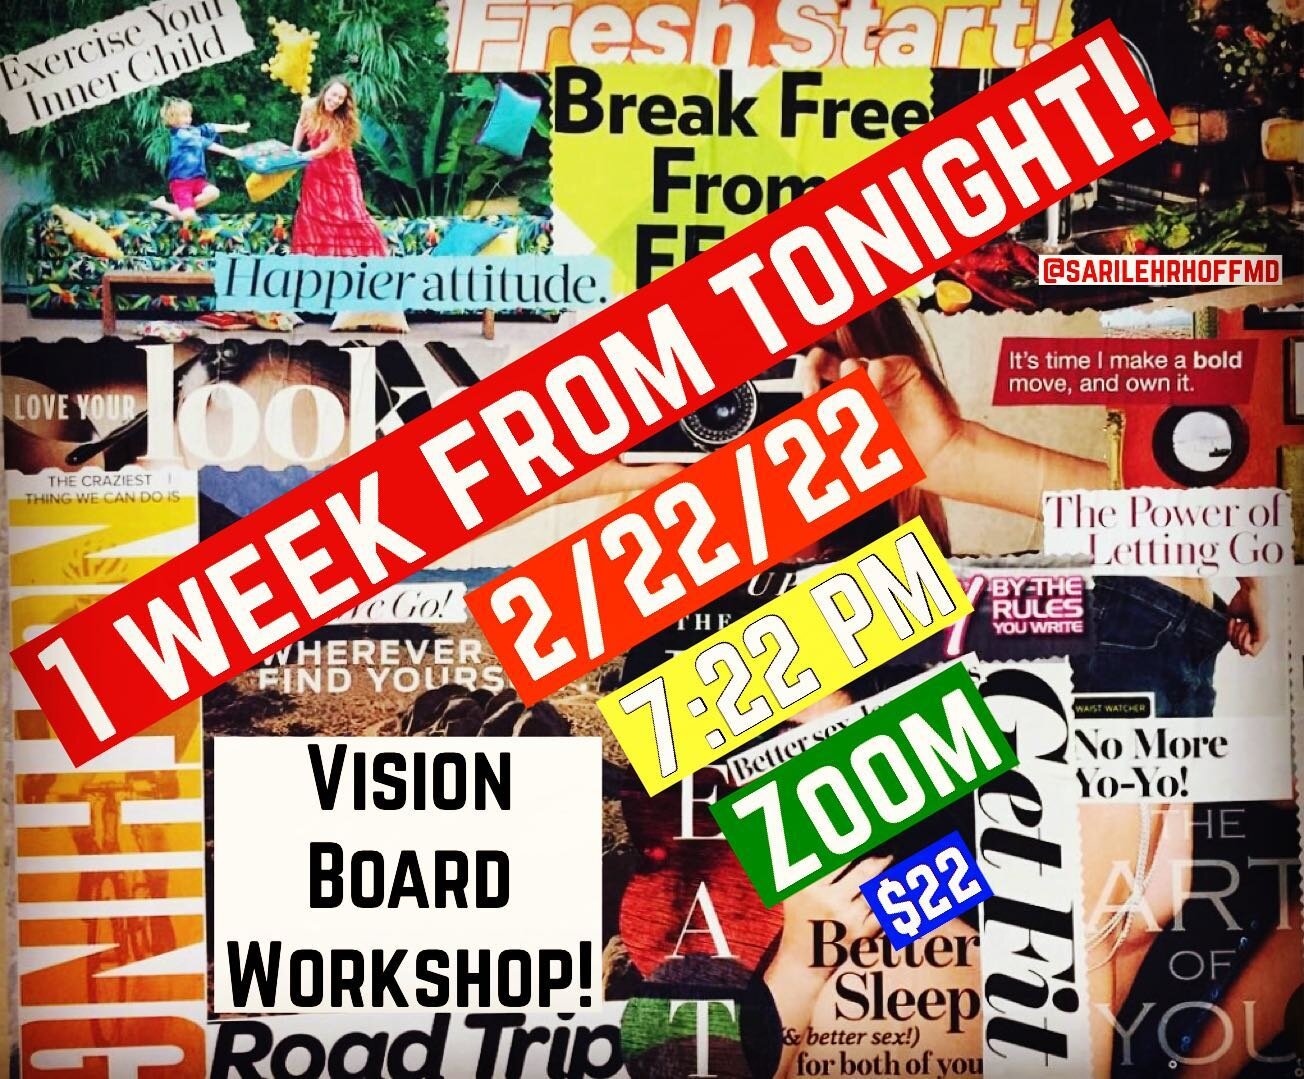 What? Vision board workshop
Manifesting what we desire for the next year.
When? 2/22/22 at 7:22 PM
Where? Zoom. Link sent day of.
How? Register by contacting office: evolvewellnessnj@gmail.com
Just say: I&rsquo;m in!
How much? $22 dollars venmo @sari